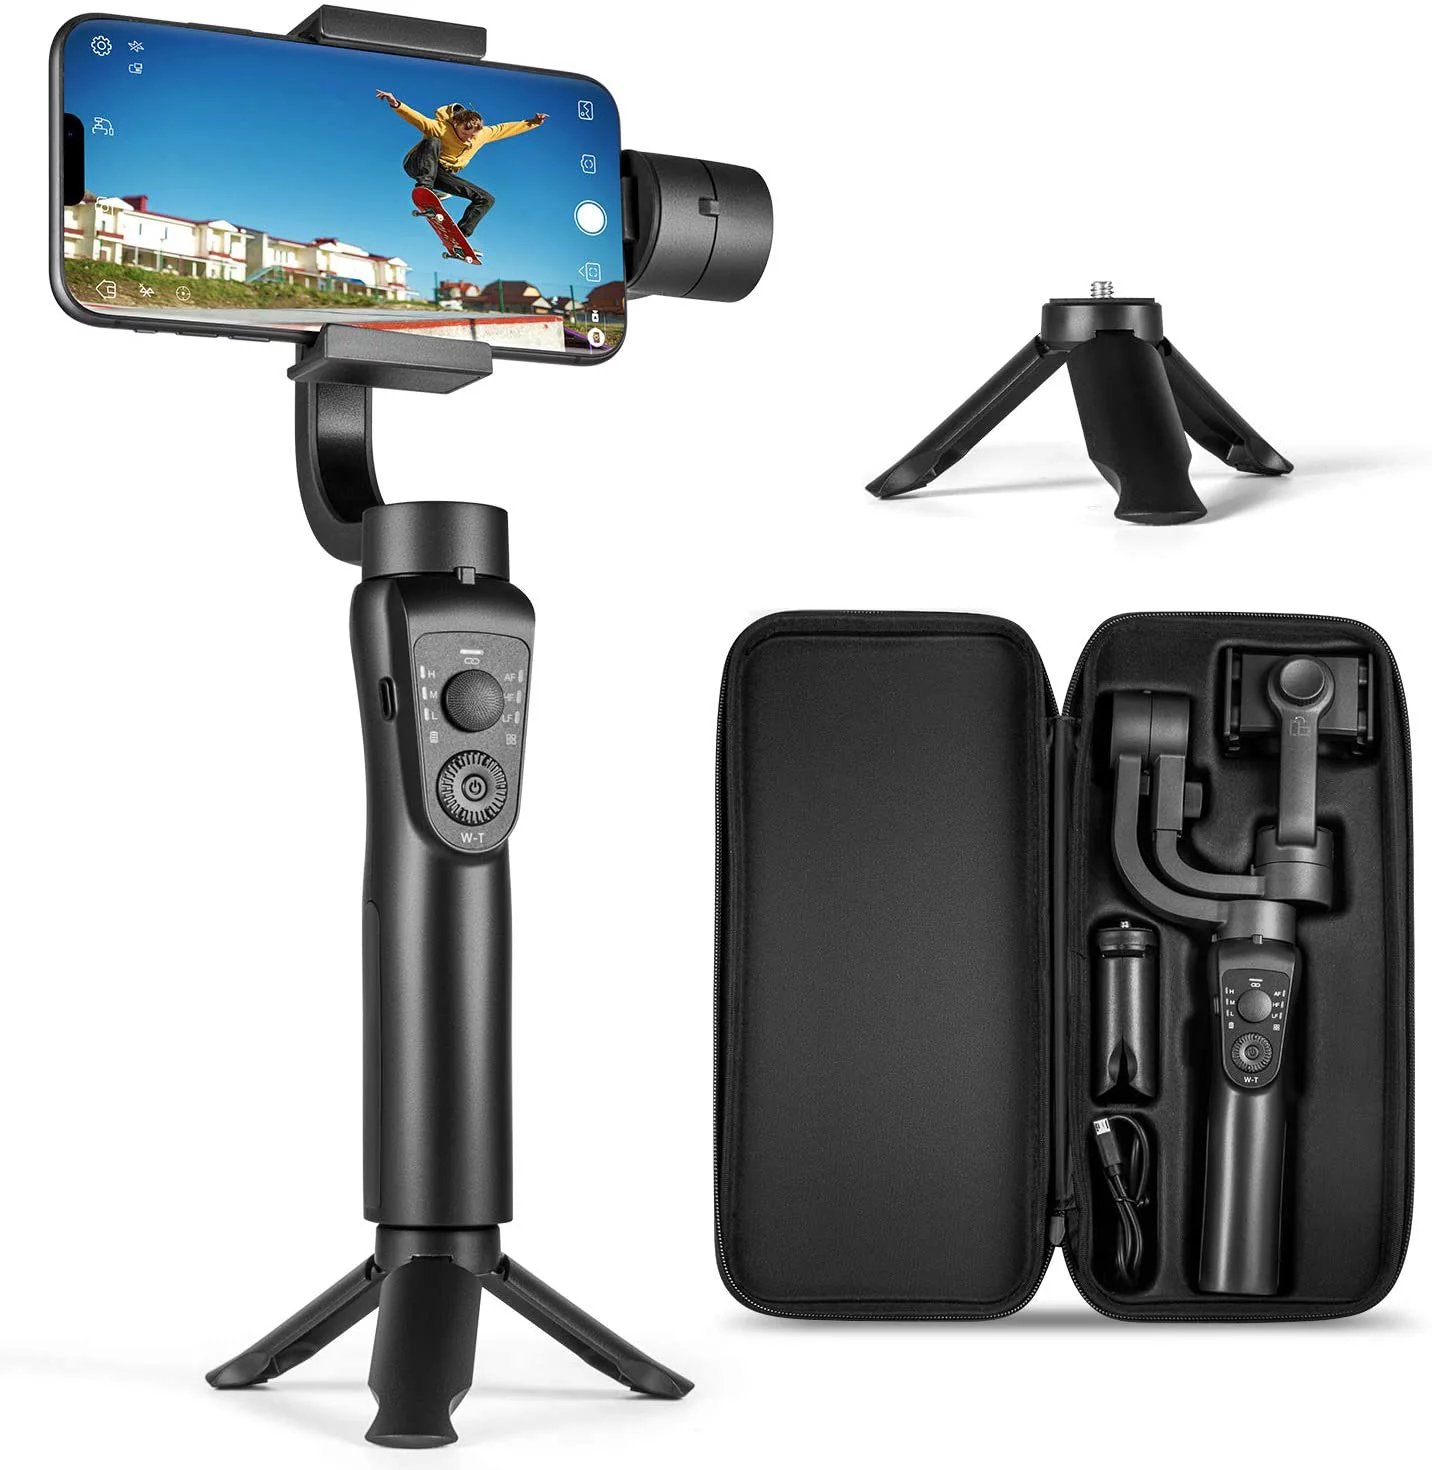 3-Axis Gimbal Stabilizer for Smartphones